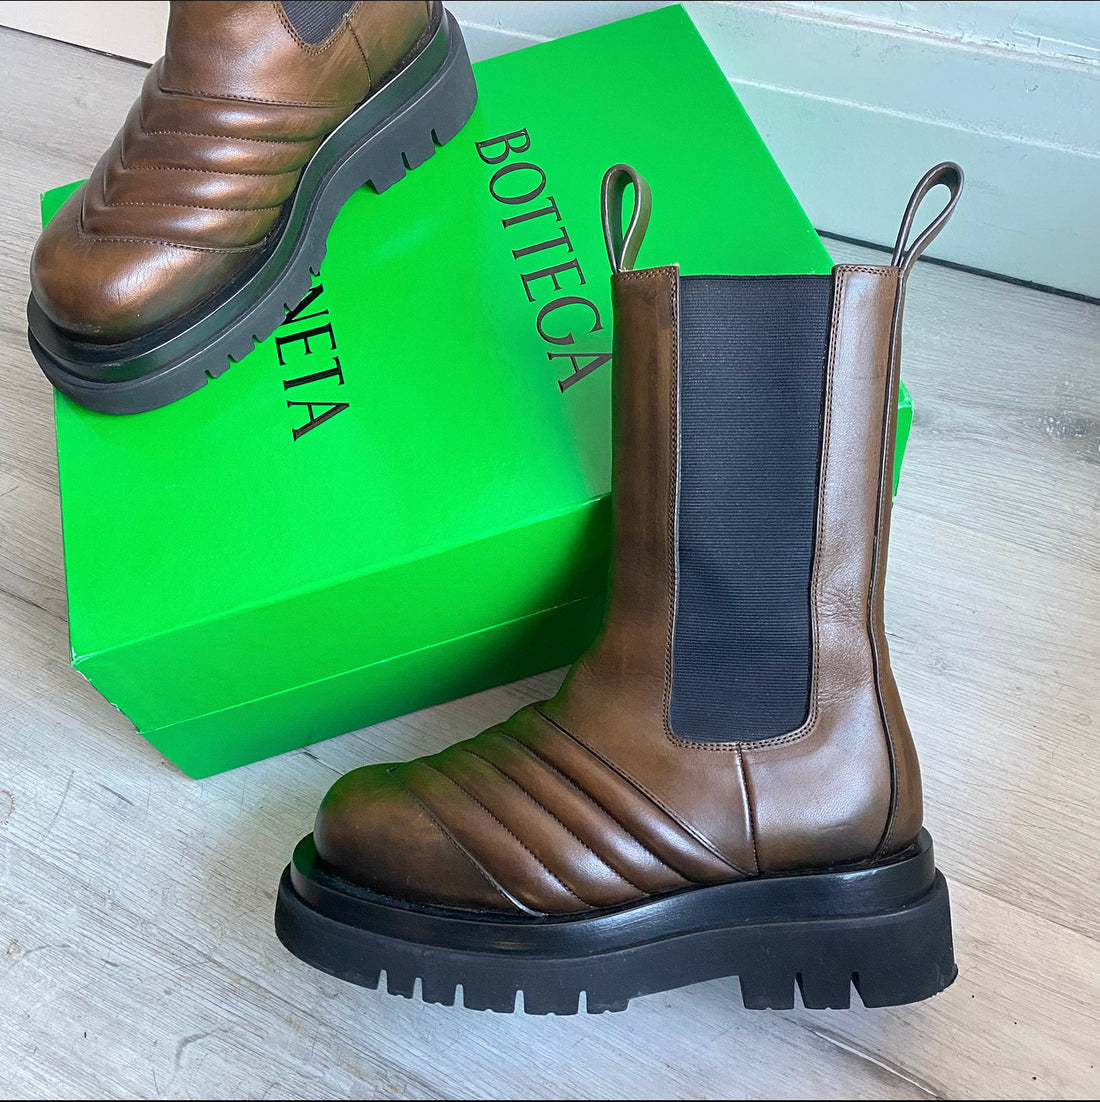 Bottega Veneta Brown Quilted Leather Boots - 6.5